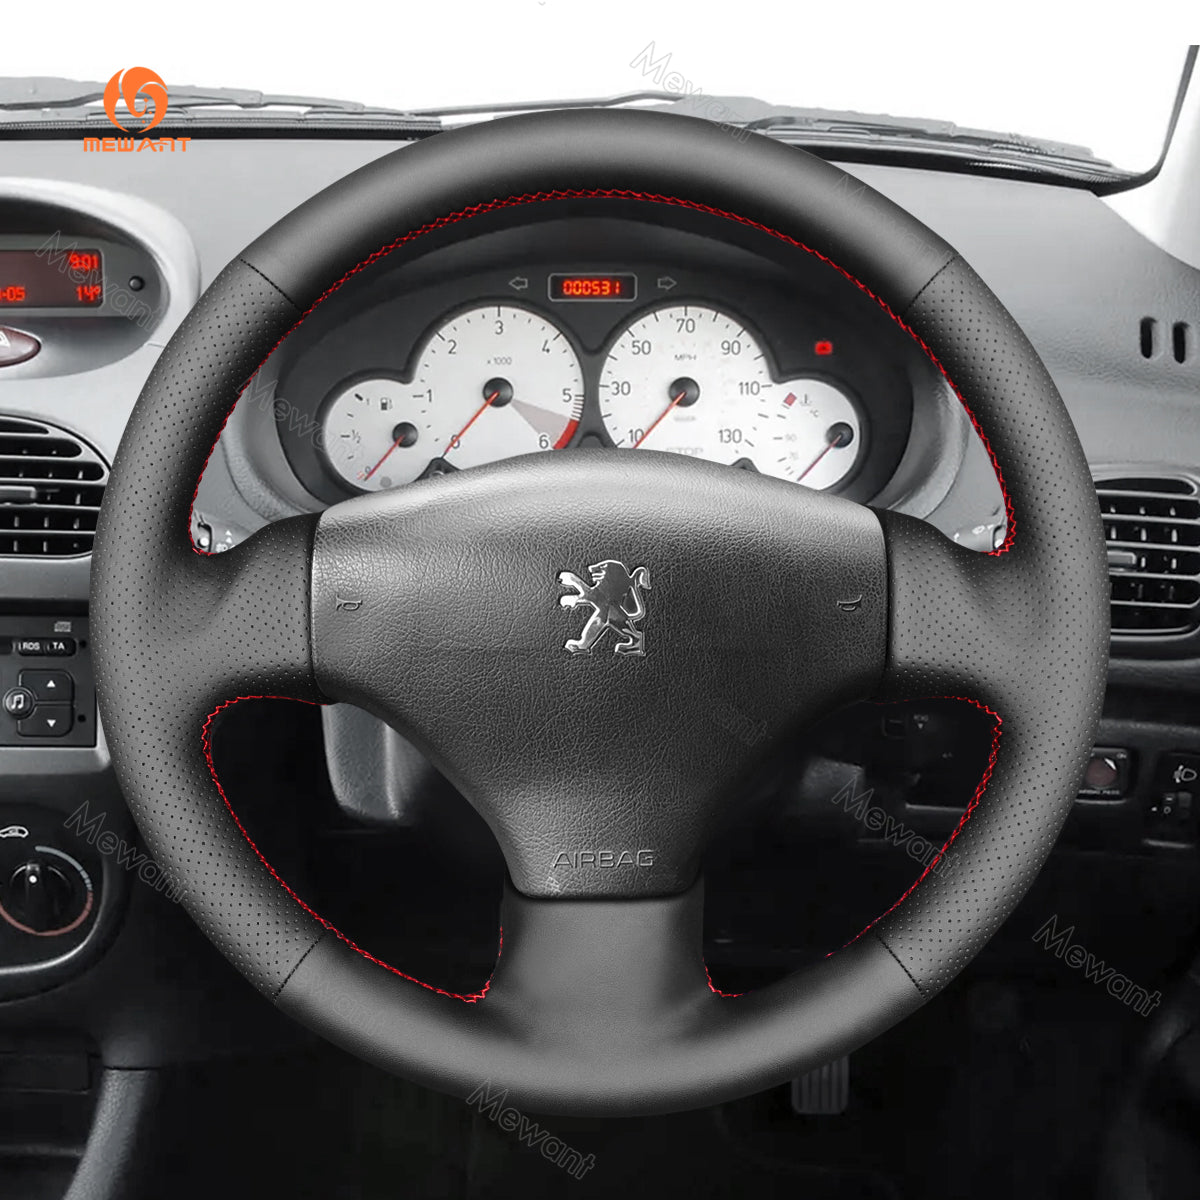 MEWANT Hand Stitch Car Steering Wheel Cover for Peugeot 206 2001-2009 / 206 SW 2002-2007